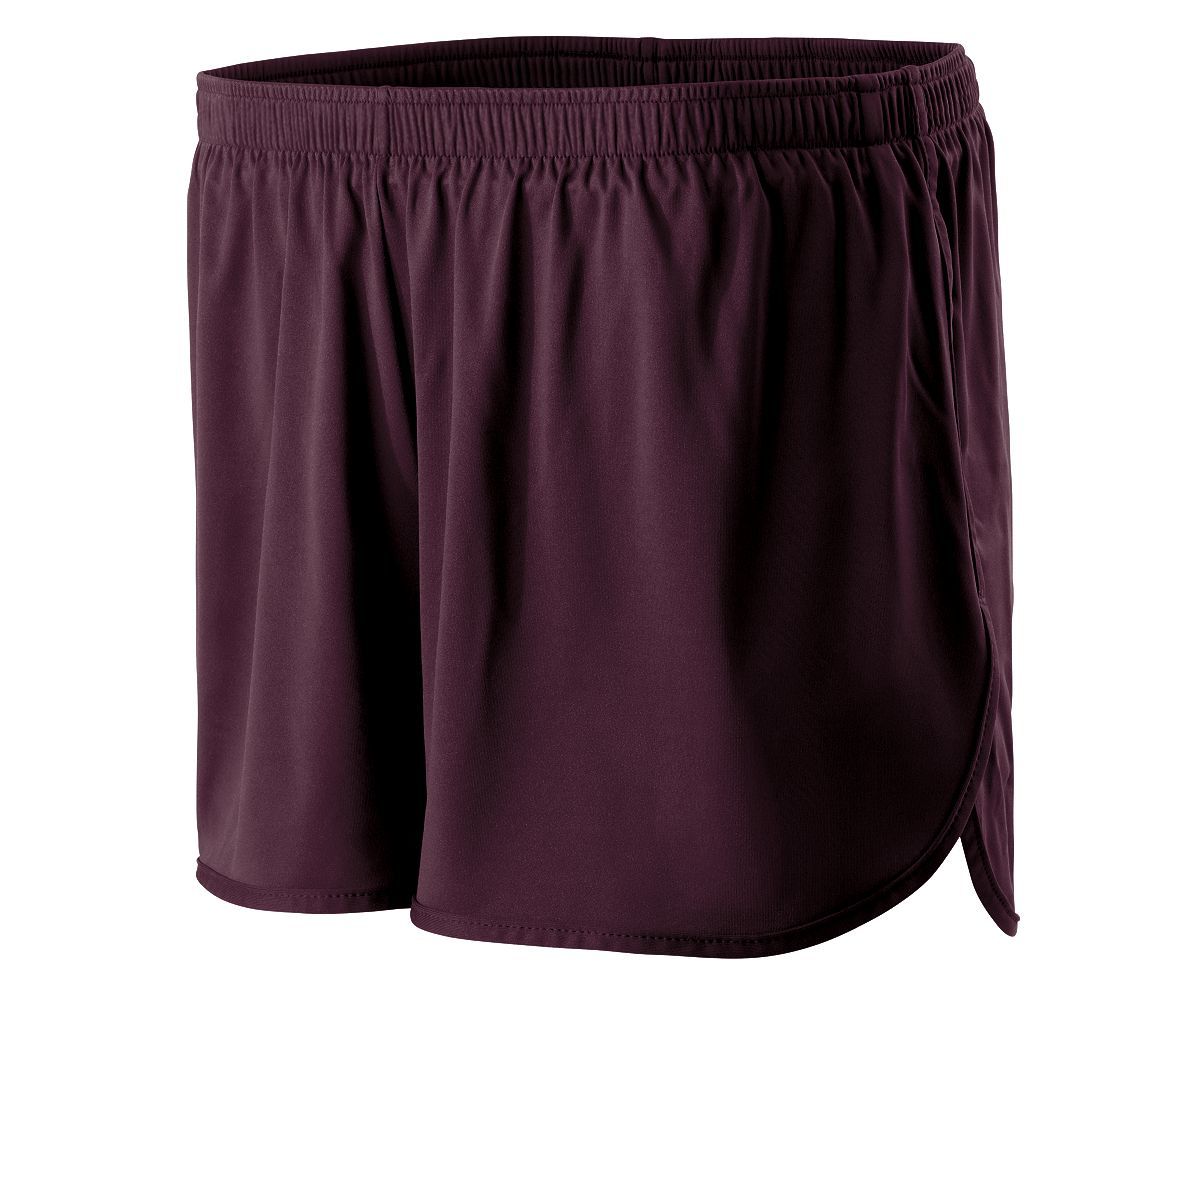 Holloway Anchor Shorts in Dark Maroon  -Part of the Adult, Adult-Shorts, Track-Field, Holloway product lines at KanaleyCreations.com